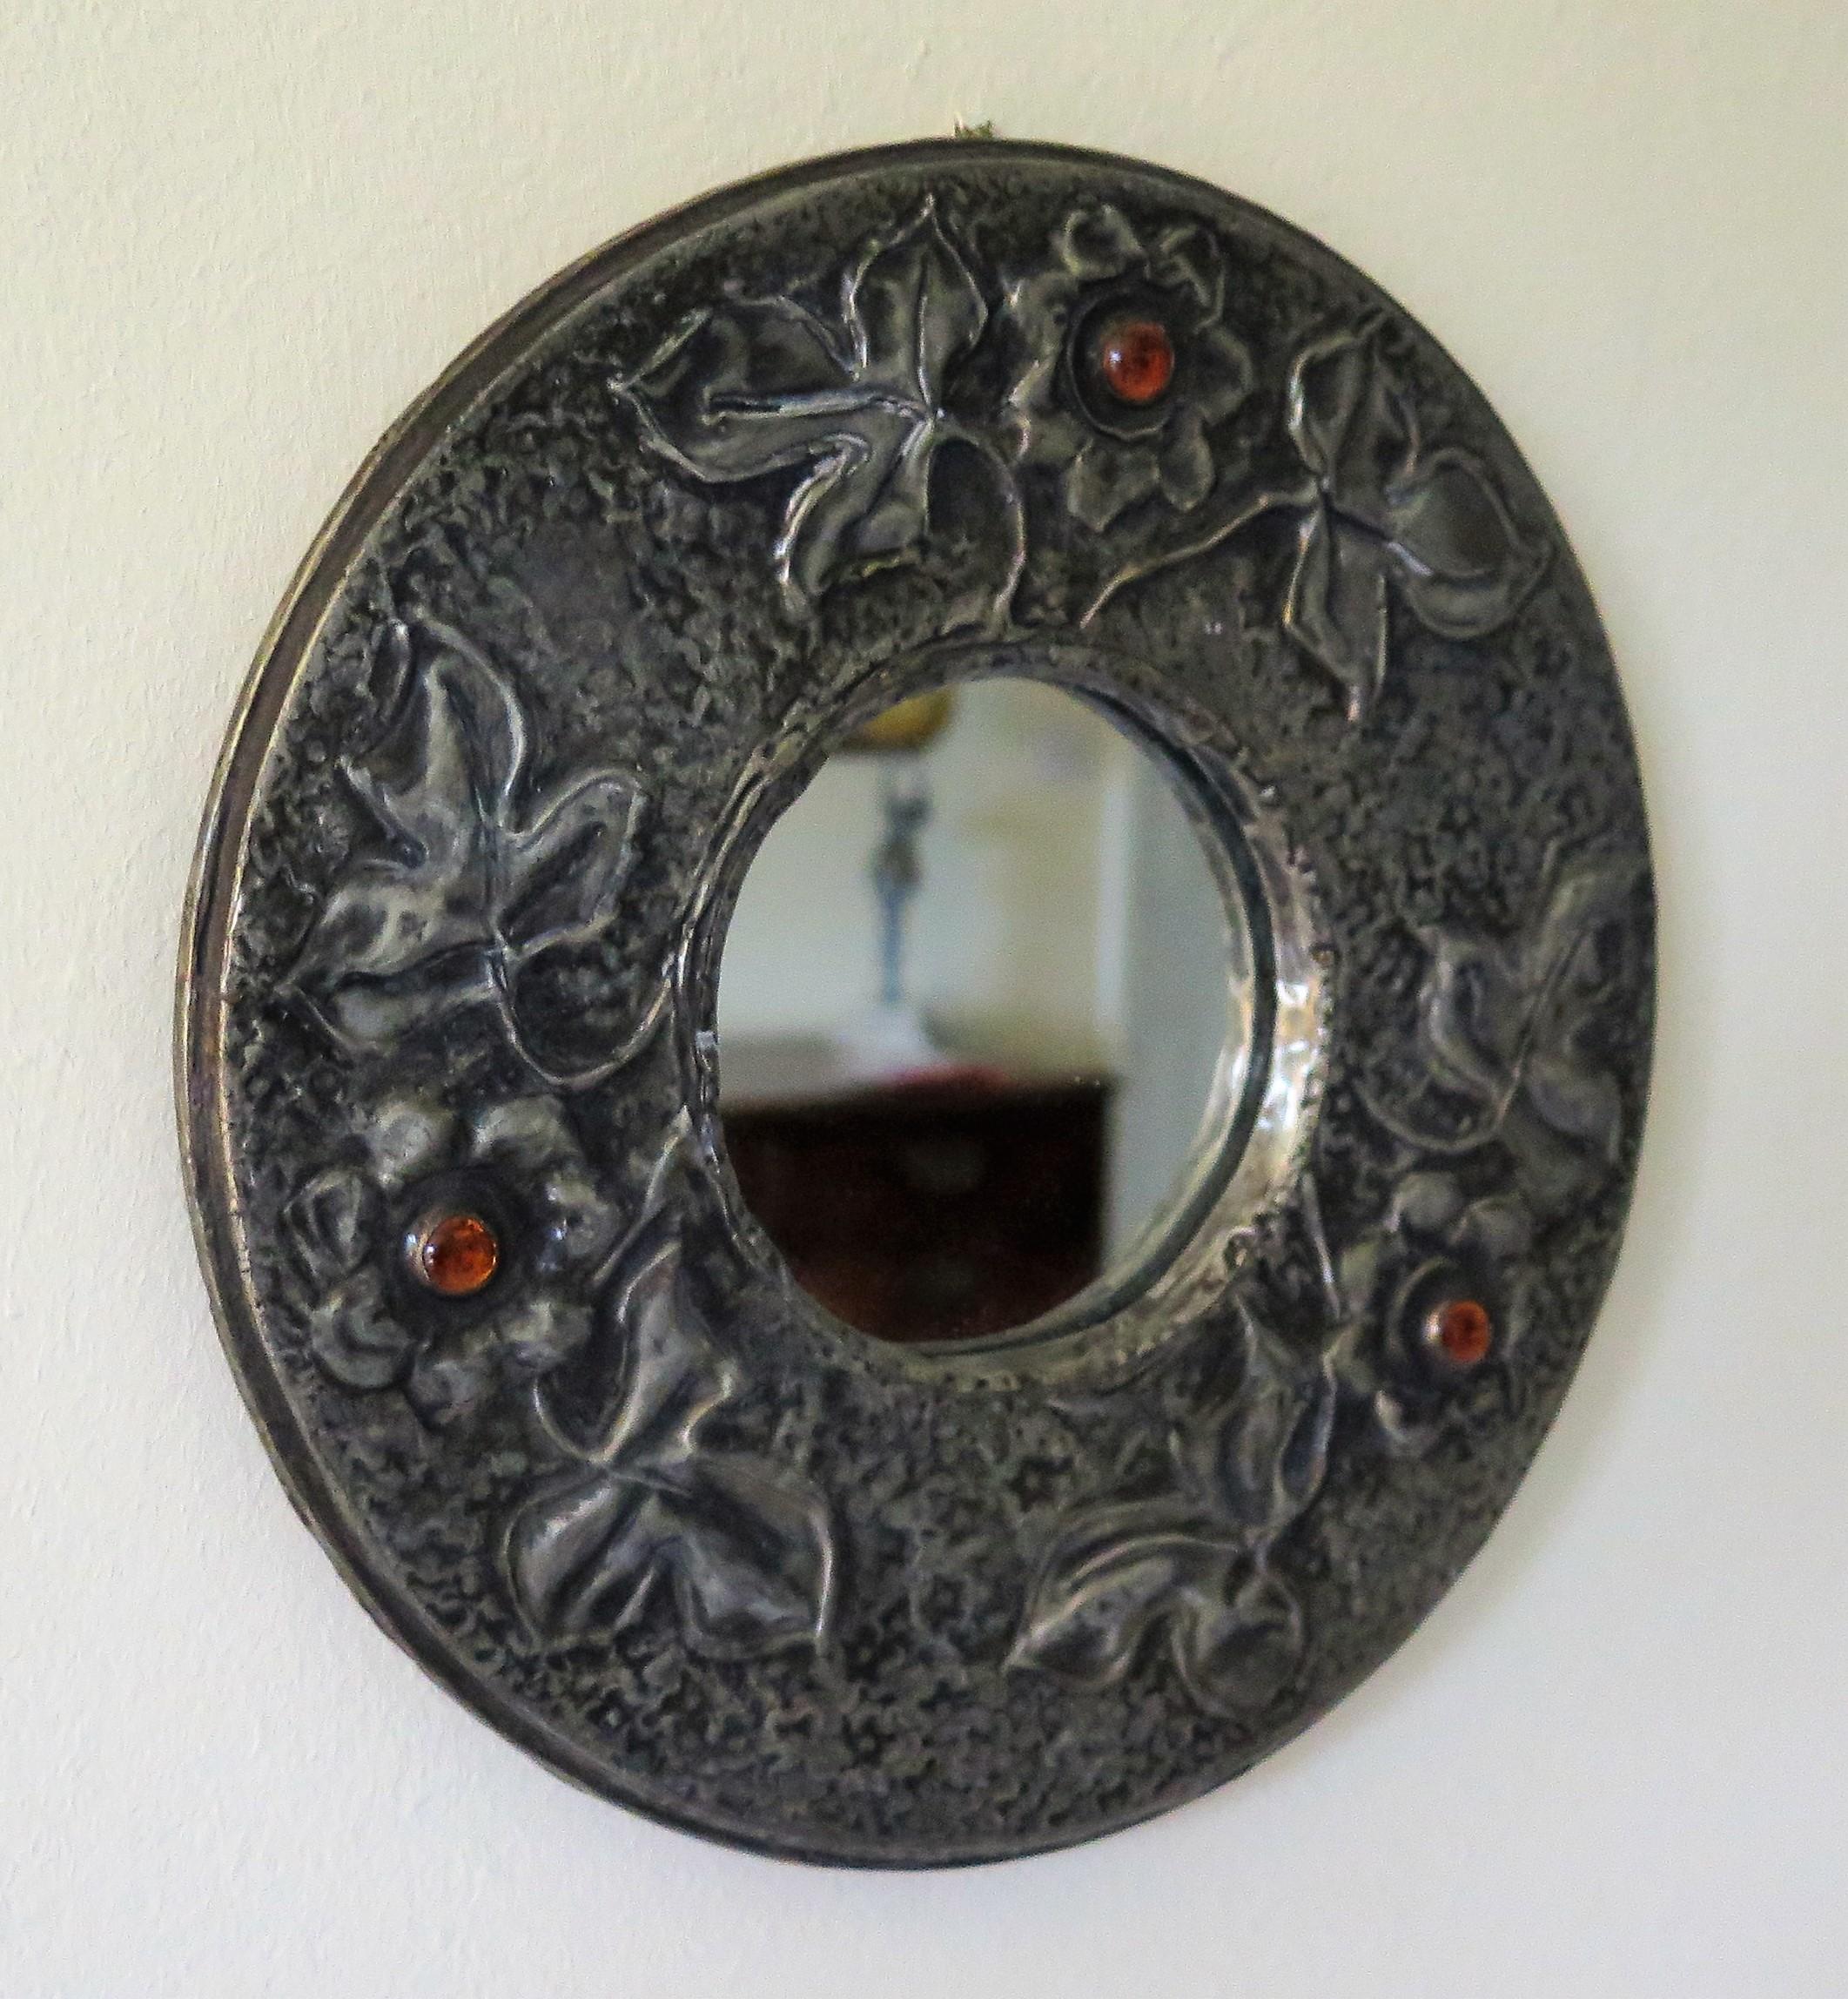 This is a very decorative English circular wall mirror of small diameter, made of hammered Pewter, with amber glass cabochons and dating to the English Arts and Crafts period, circa 1900

The mirror is circular with a central mirror glass with a